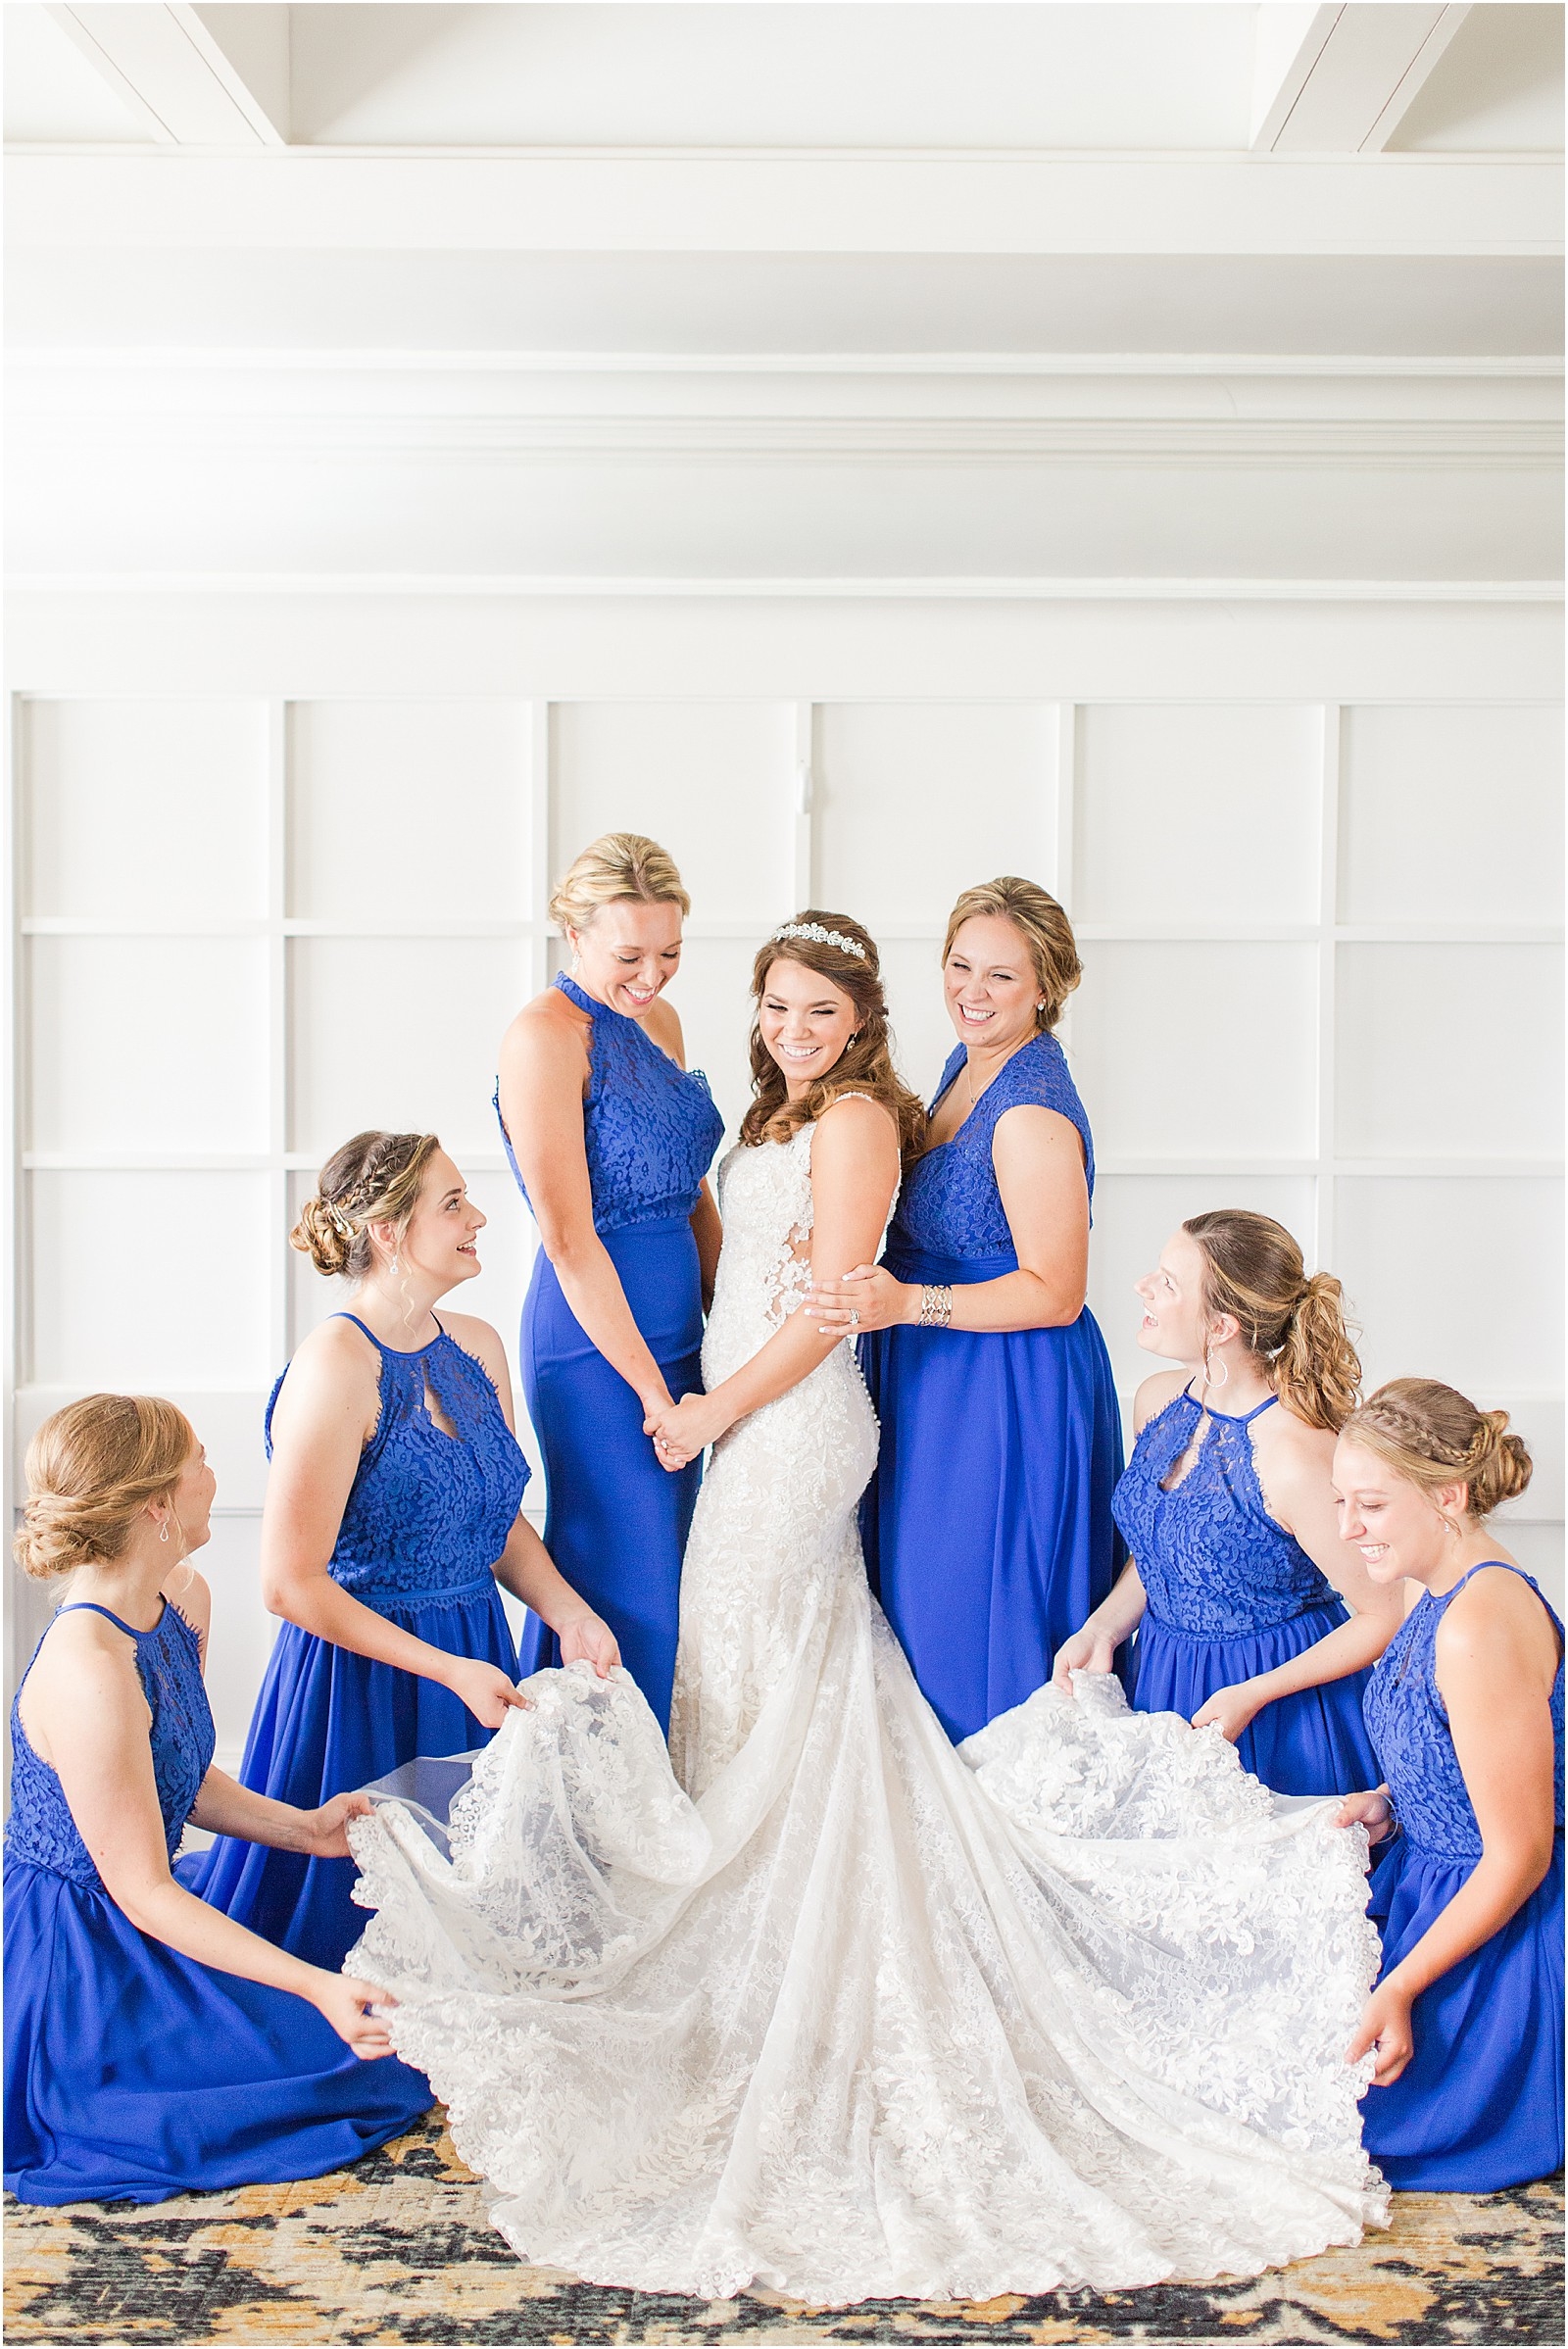 An Evansville County Club Wedding | Abby and Stratton 024.jpg